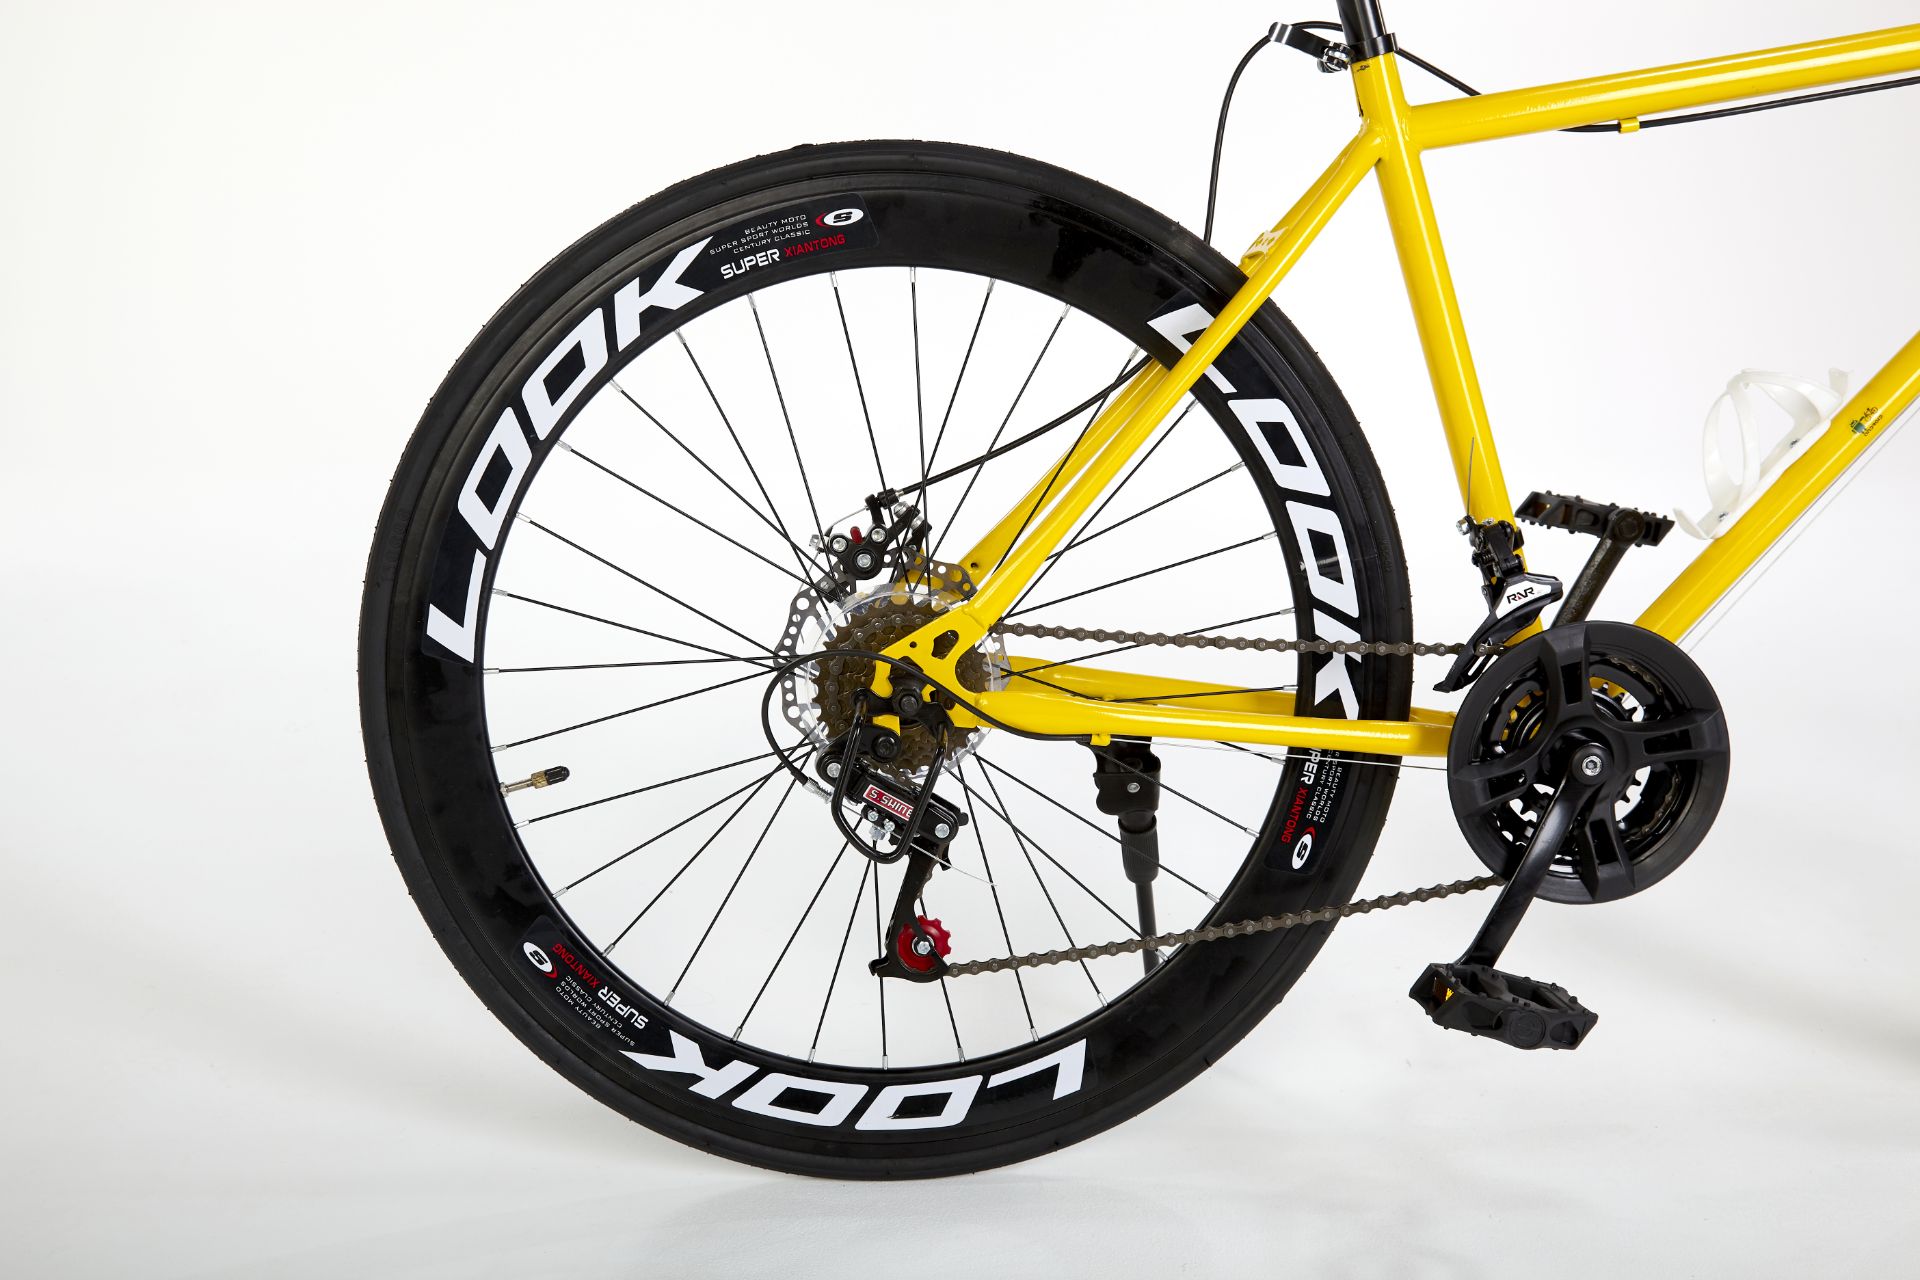 YELLOW STREET BIKE WITH 21 GREAR, BRAKE DISKS, KICK STAND, COOL THIN TYRES - Image 5 of 12